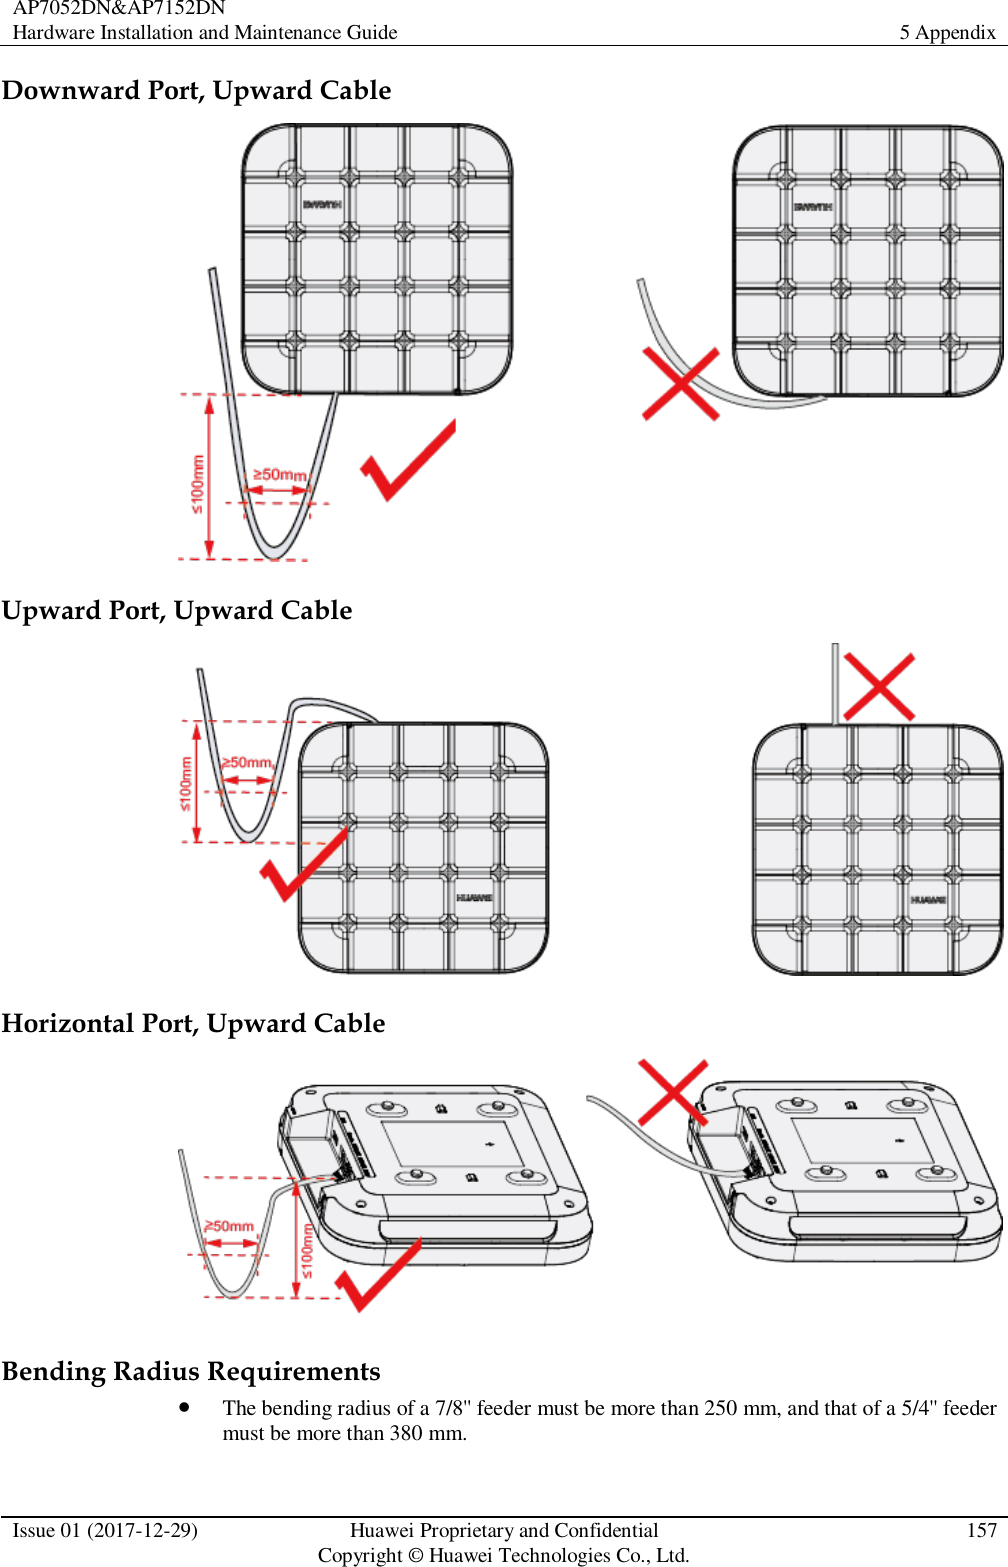 AP7052DN&amp;AP7152DN Hardware Installation and Maintenance Guide 5 Appendix  Issue 01 (2017-12-29) Huawei Proprietary and Confidential                                     Copyright © Huawei Technologies Co., Ltd. 157  Downward Port, Upward Cable  Upward Port, Upward Cable  Horizontal Port, Upward Cable  Bending Radius Requirements  The bending radius of a 7/8&apos;&apos; feeder must be more than 250 mm, and that of a 5/4&apos;&apos; feeder must be more than 380 mm. 